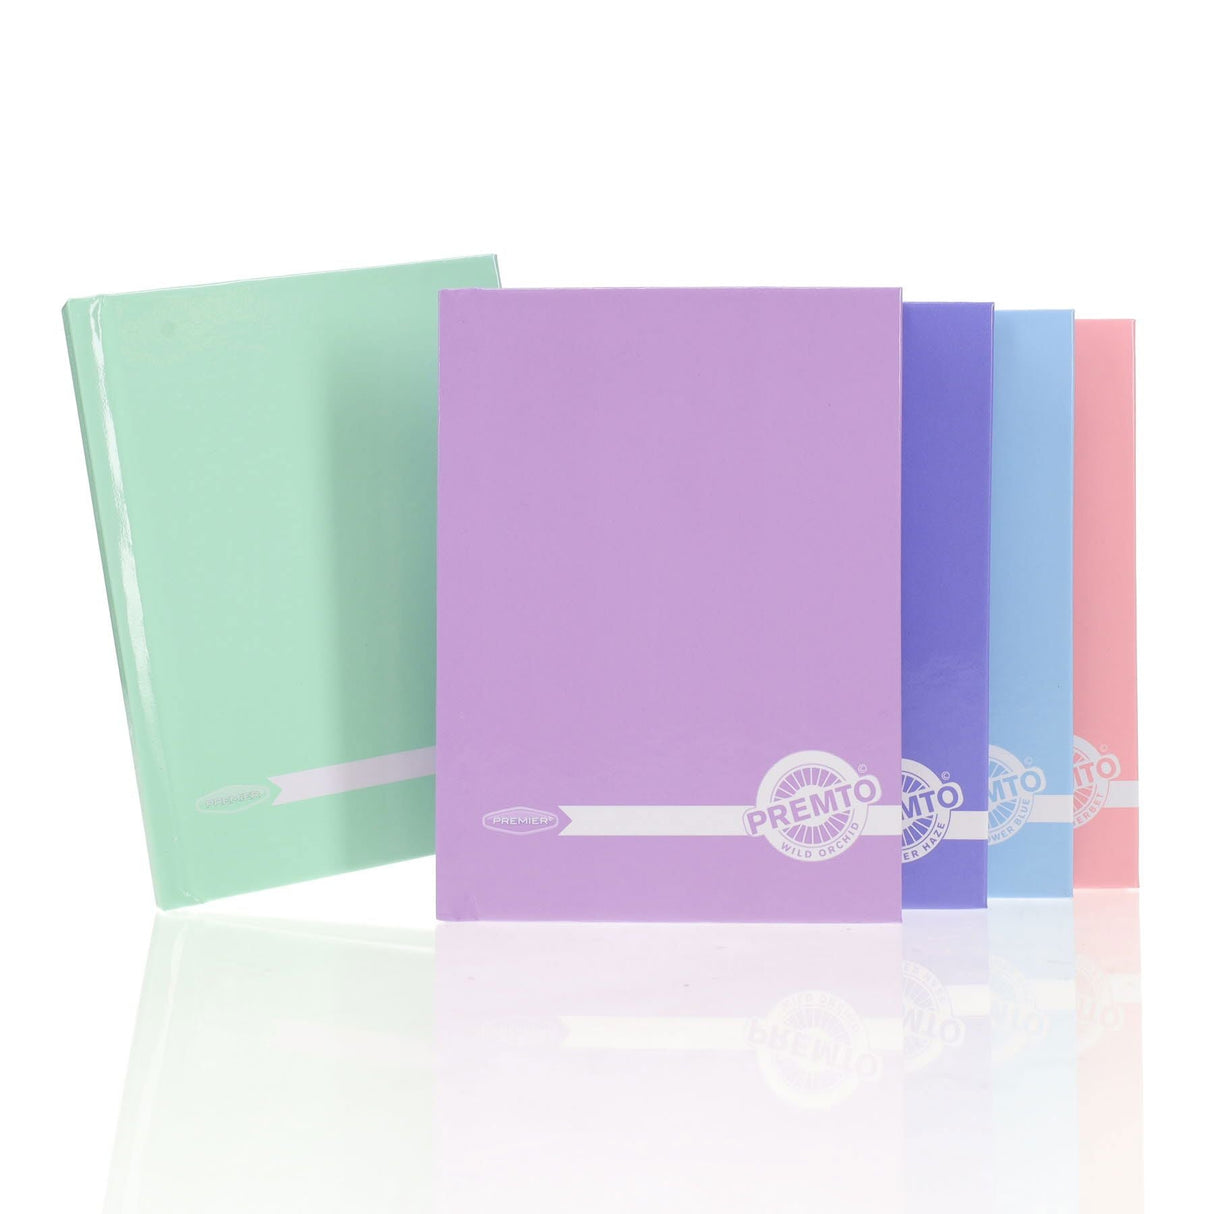 Premto Pastel A6 Hardcover Notebook - 160 Pages - Pastel - Wild Orchid | Stationery Shop UK